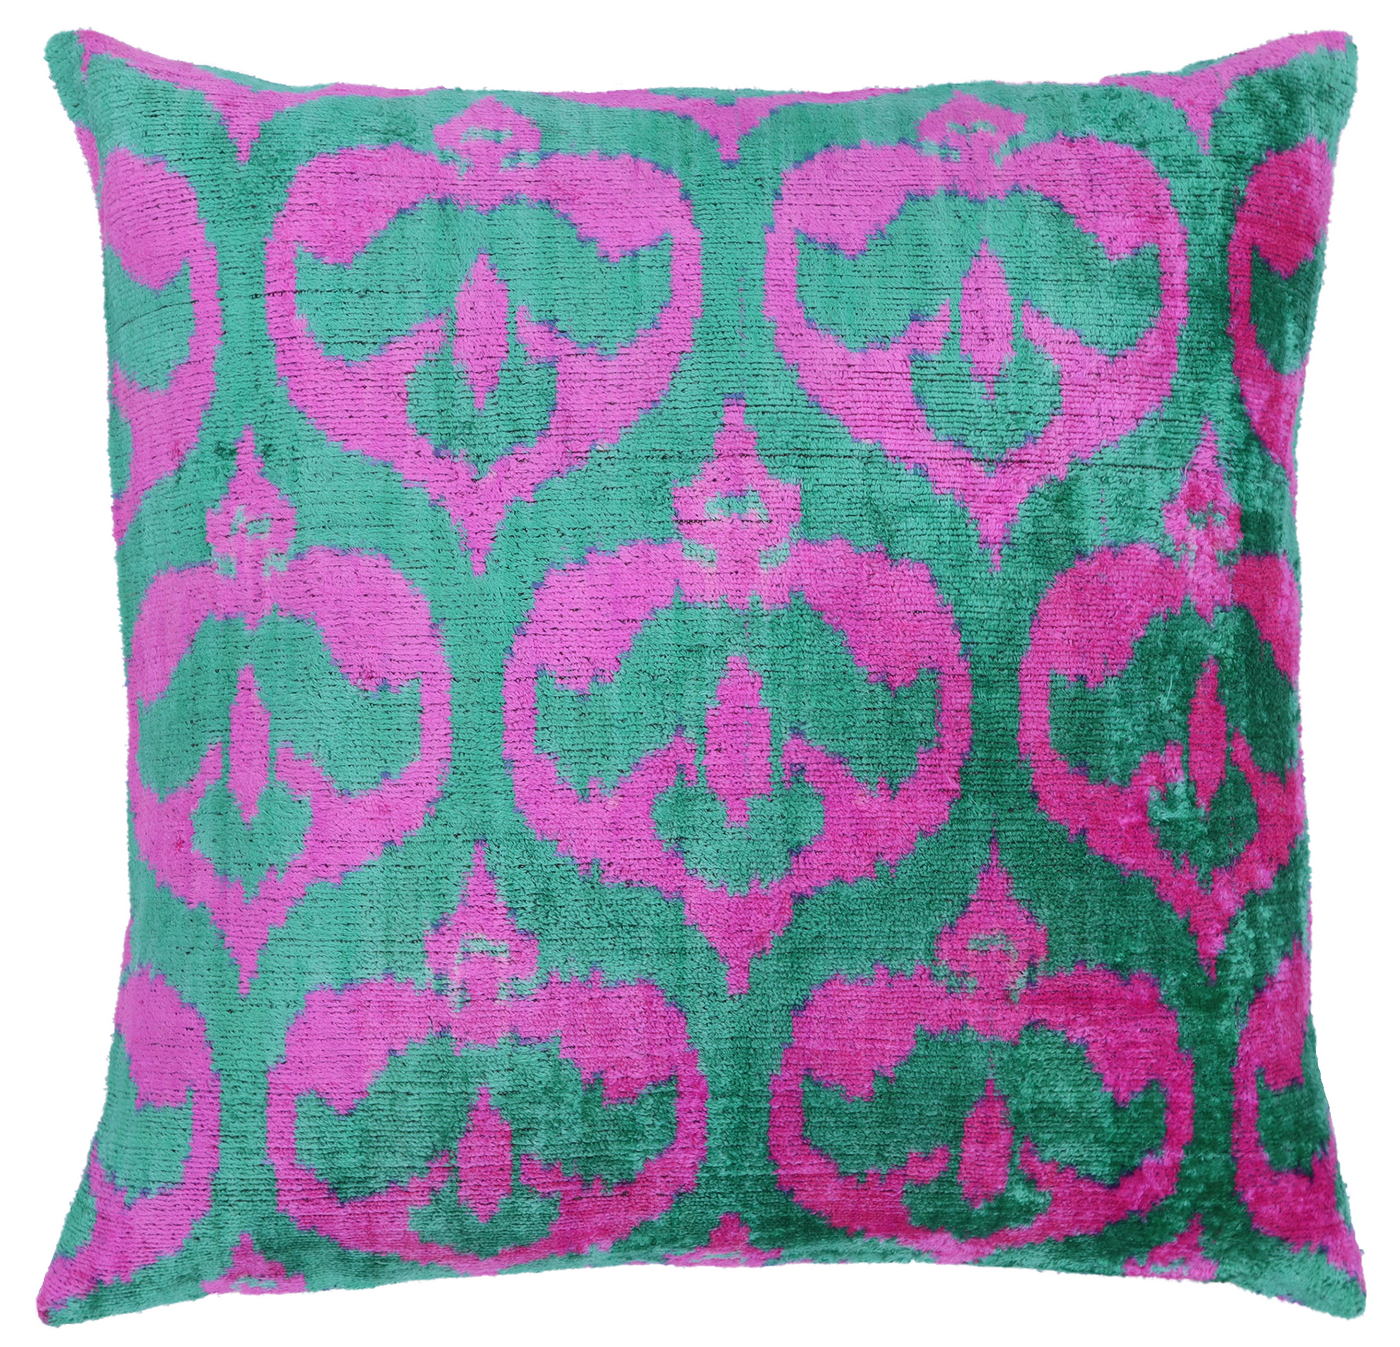 Canvello Decorative Green Pink Pillows For Couch with Down Insert - 18x18 in